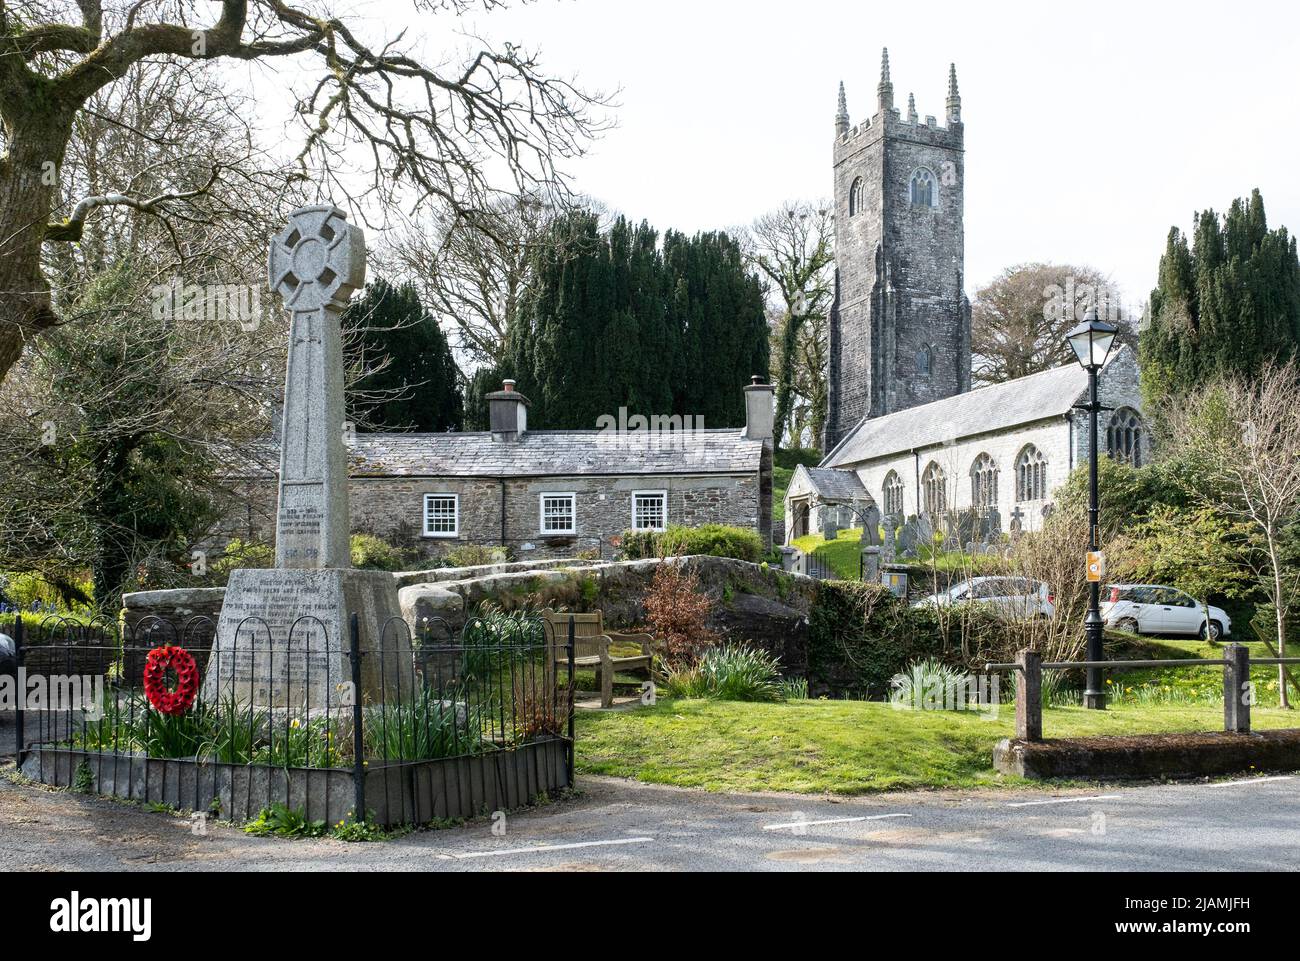 Church, houses, stone bridge and traditional Cornish stone cross with poppy wreath memorial at the centre of the hamlet of Altarnun, Cornwall. Stock Photo